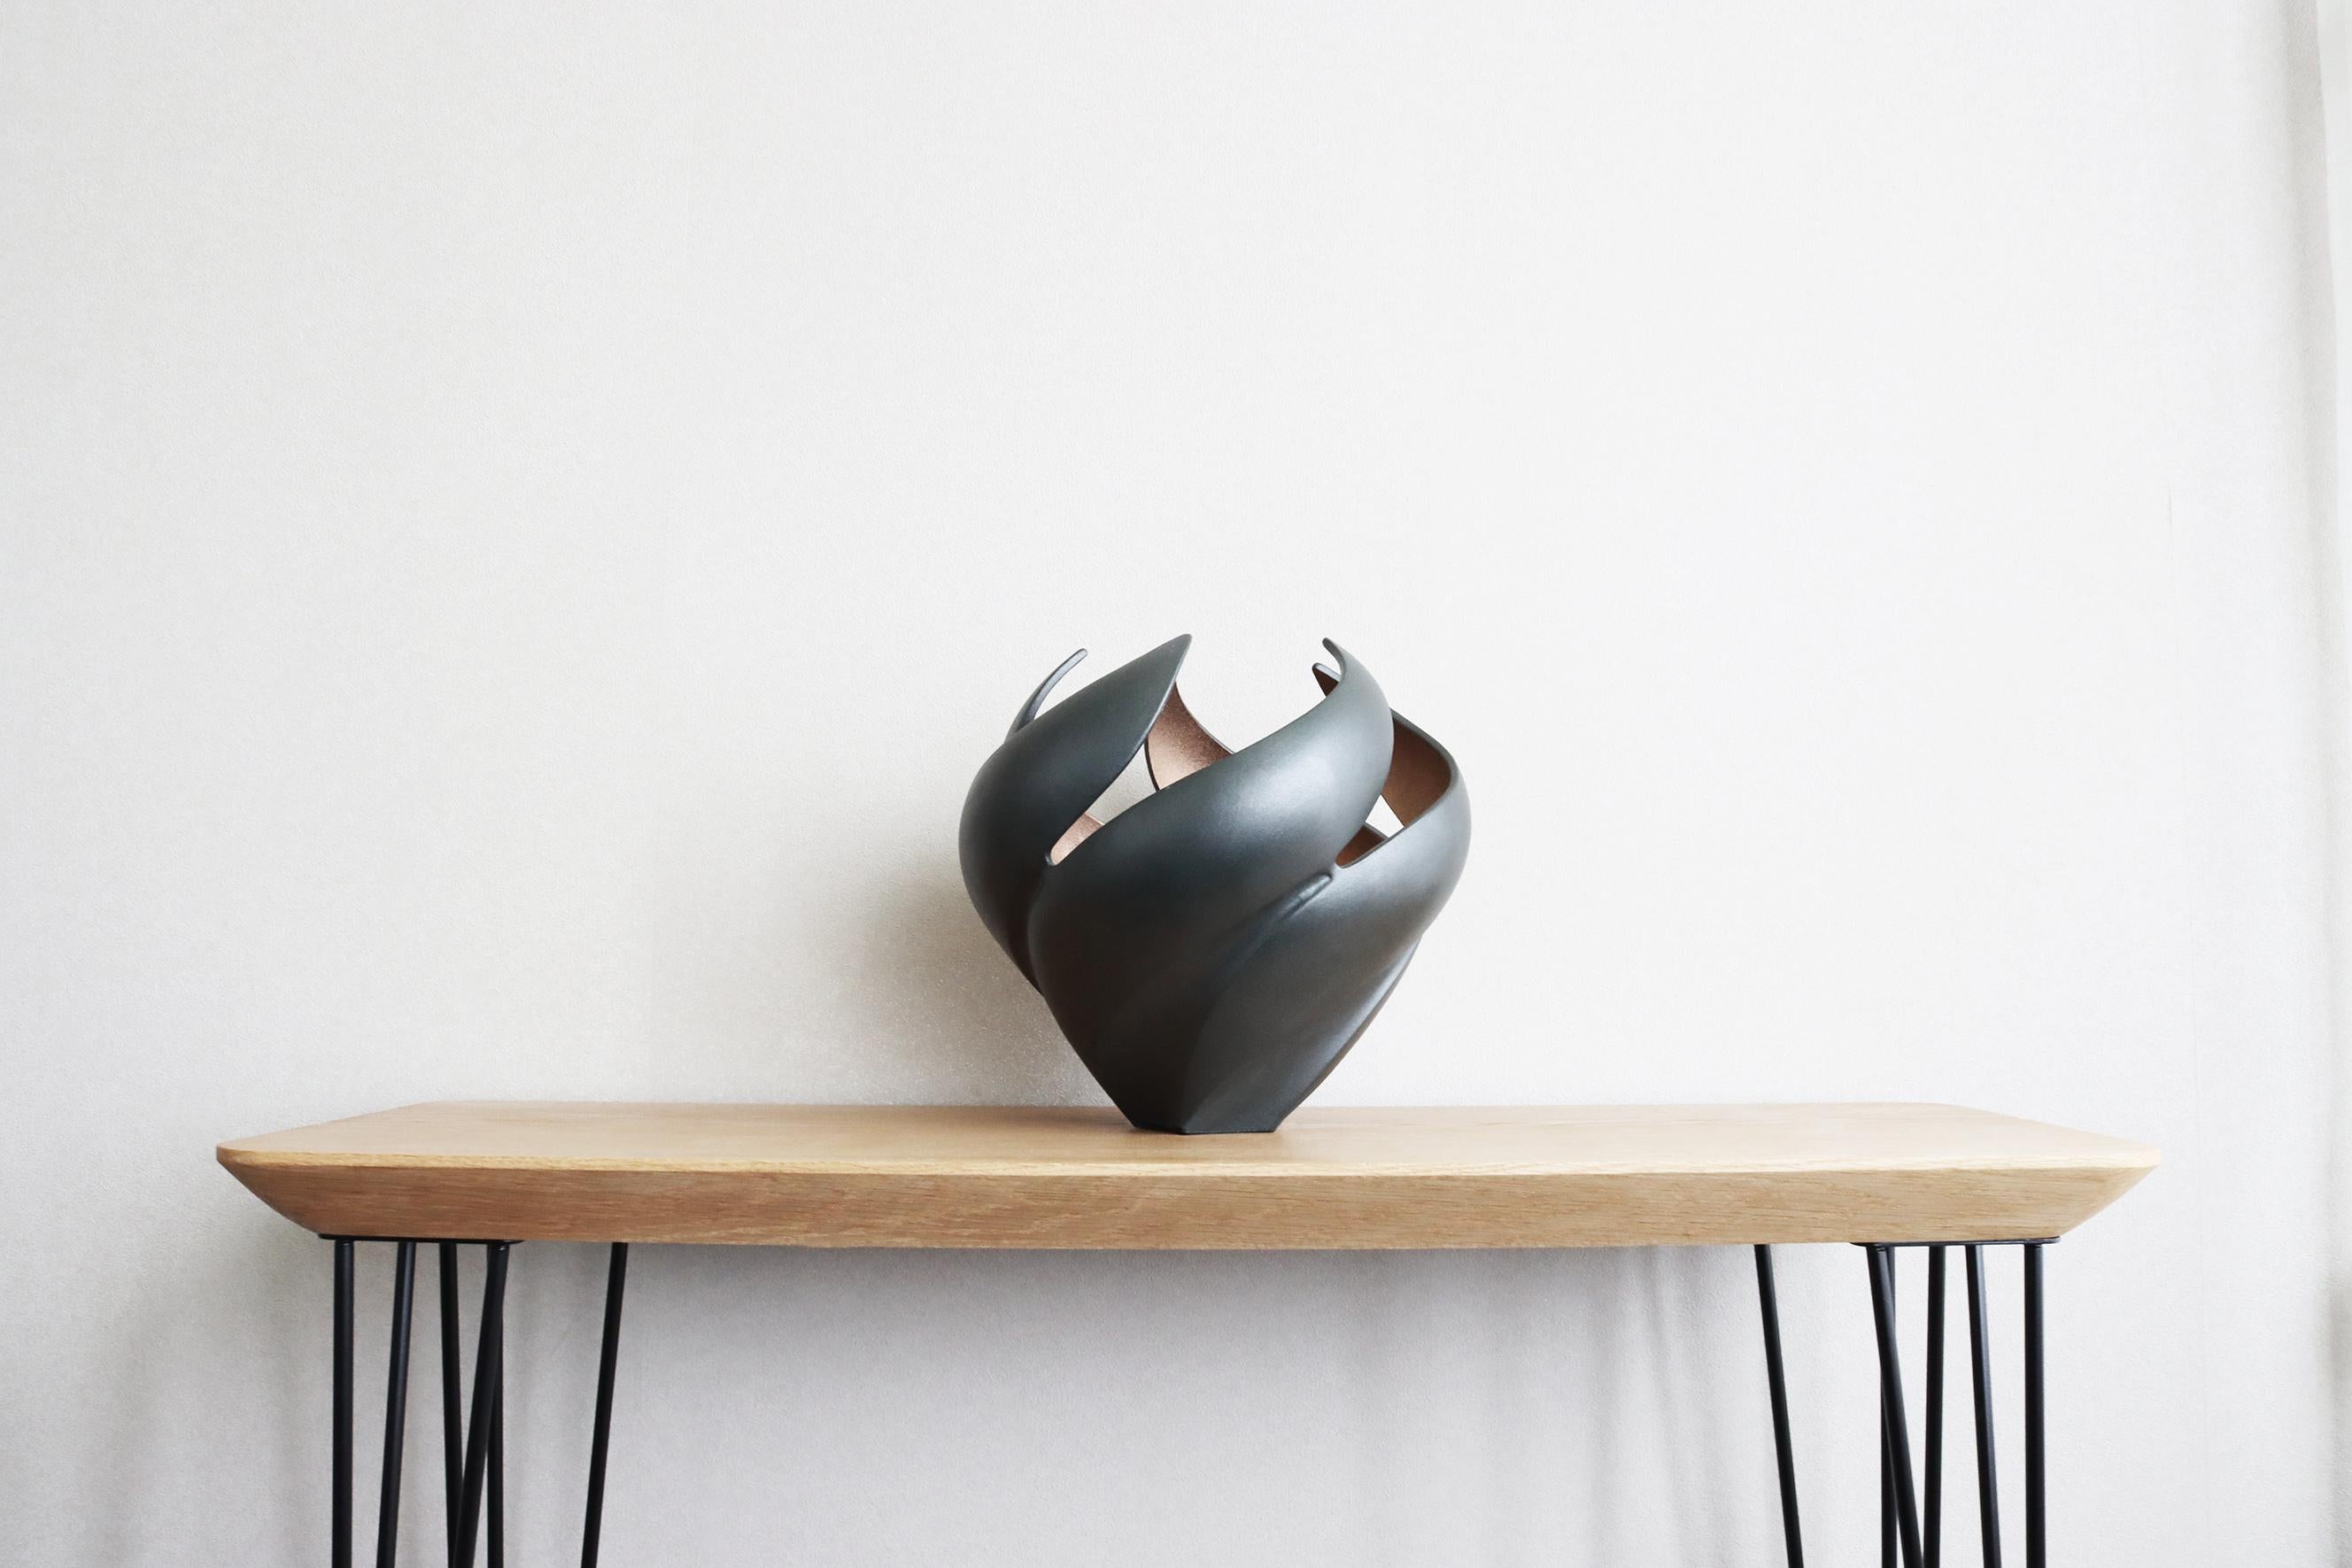 The Twisted vessel is an exquisite piece of art that truly captures the spontaneity and beauty of nature. Whether you choose to display it as a sculptural masterpiece or as a functional vase for your favorite blooms, this vessel is sure to add a